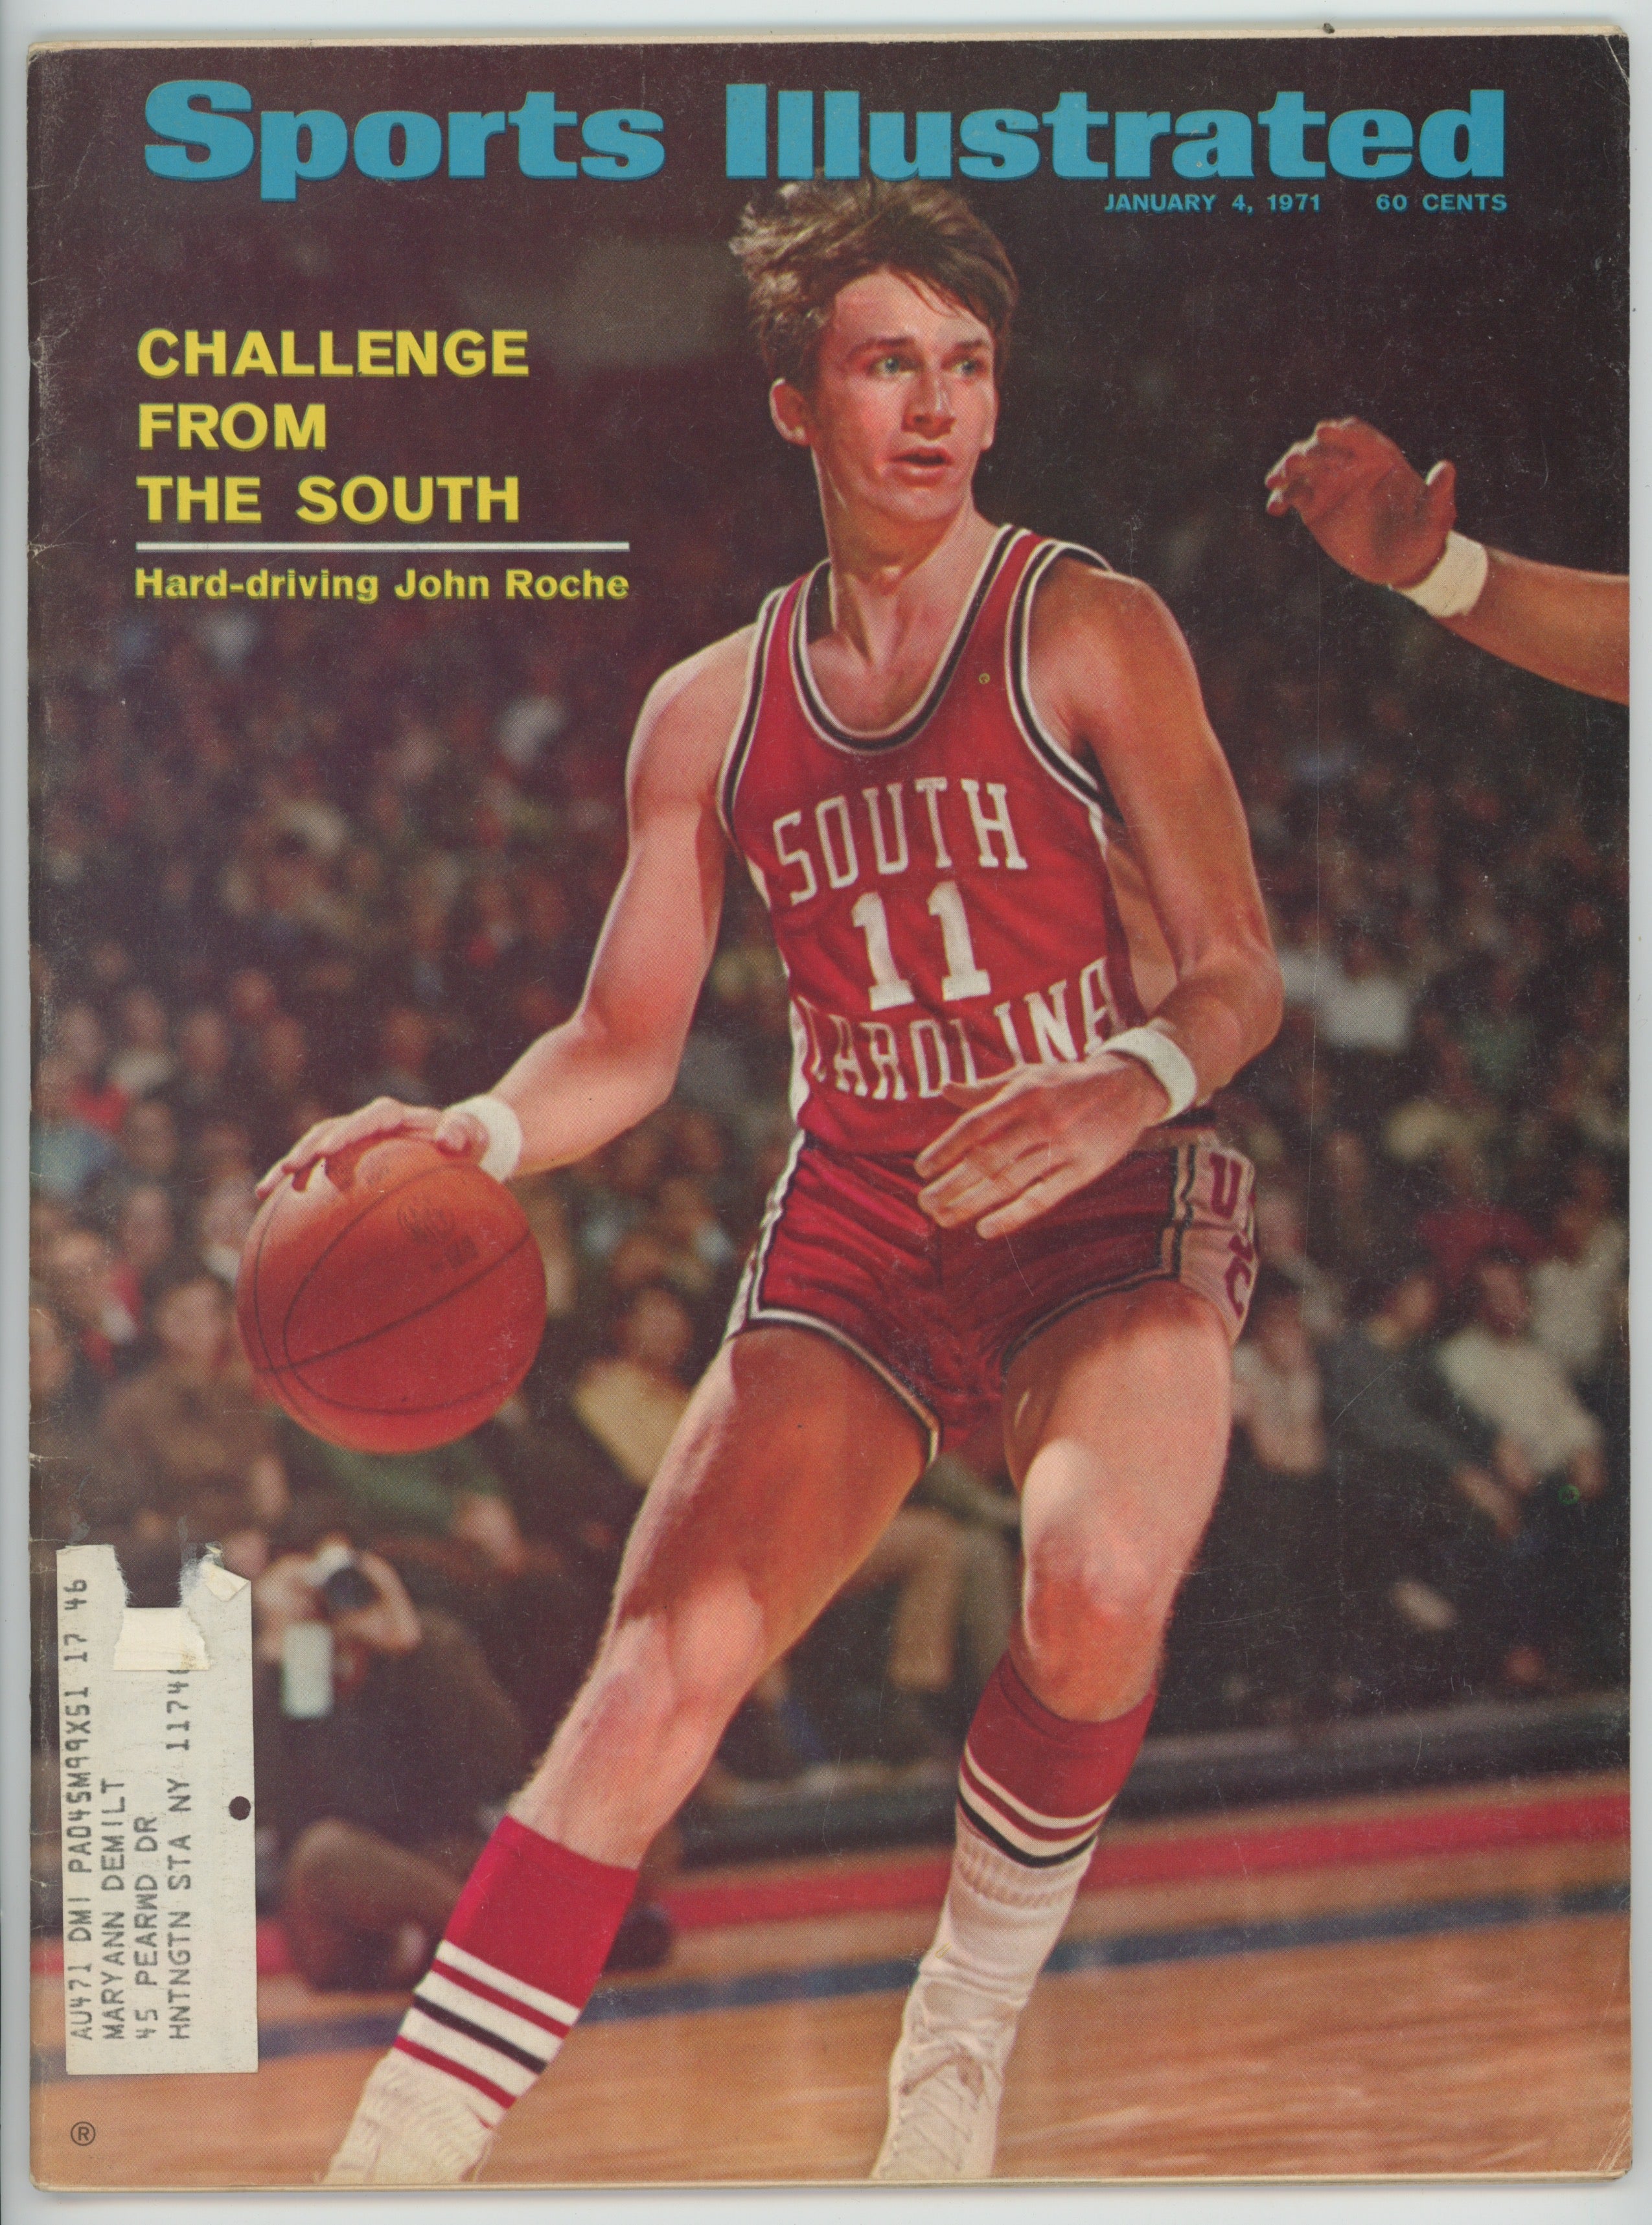 John Roche South Carolina “Challenge from the South” 1/4/71 EX ML